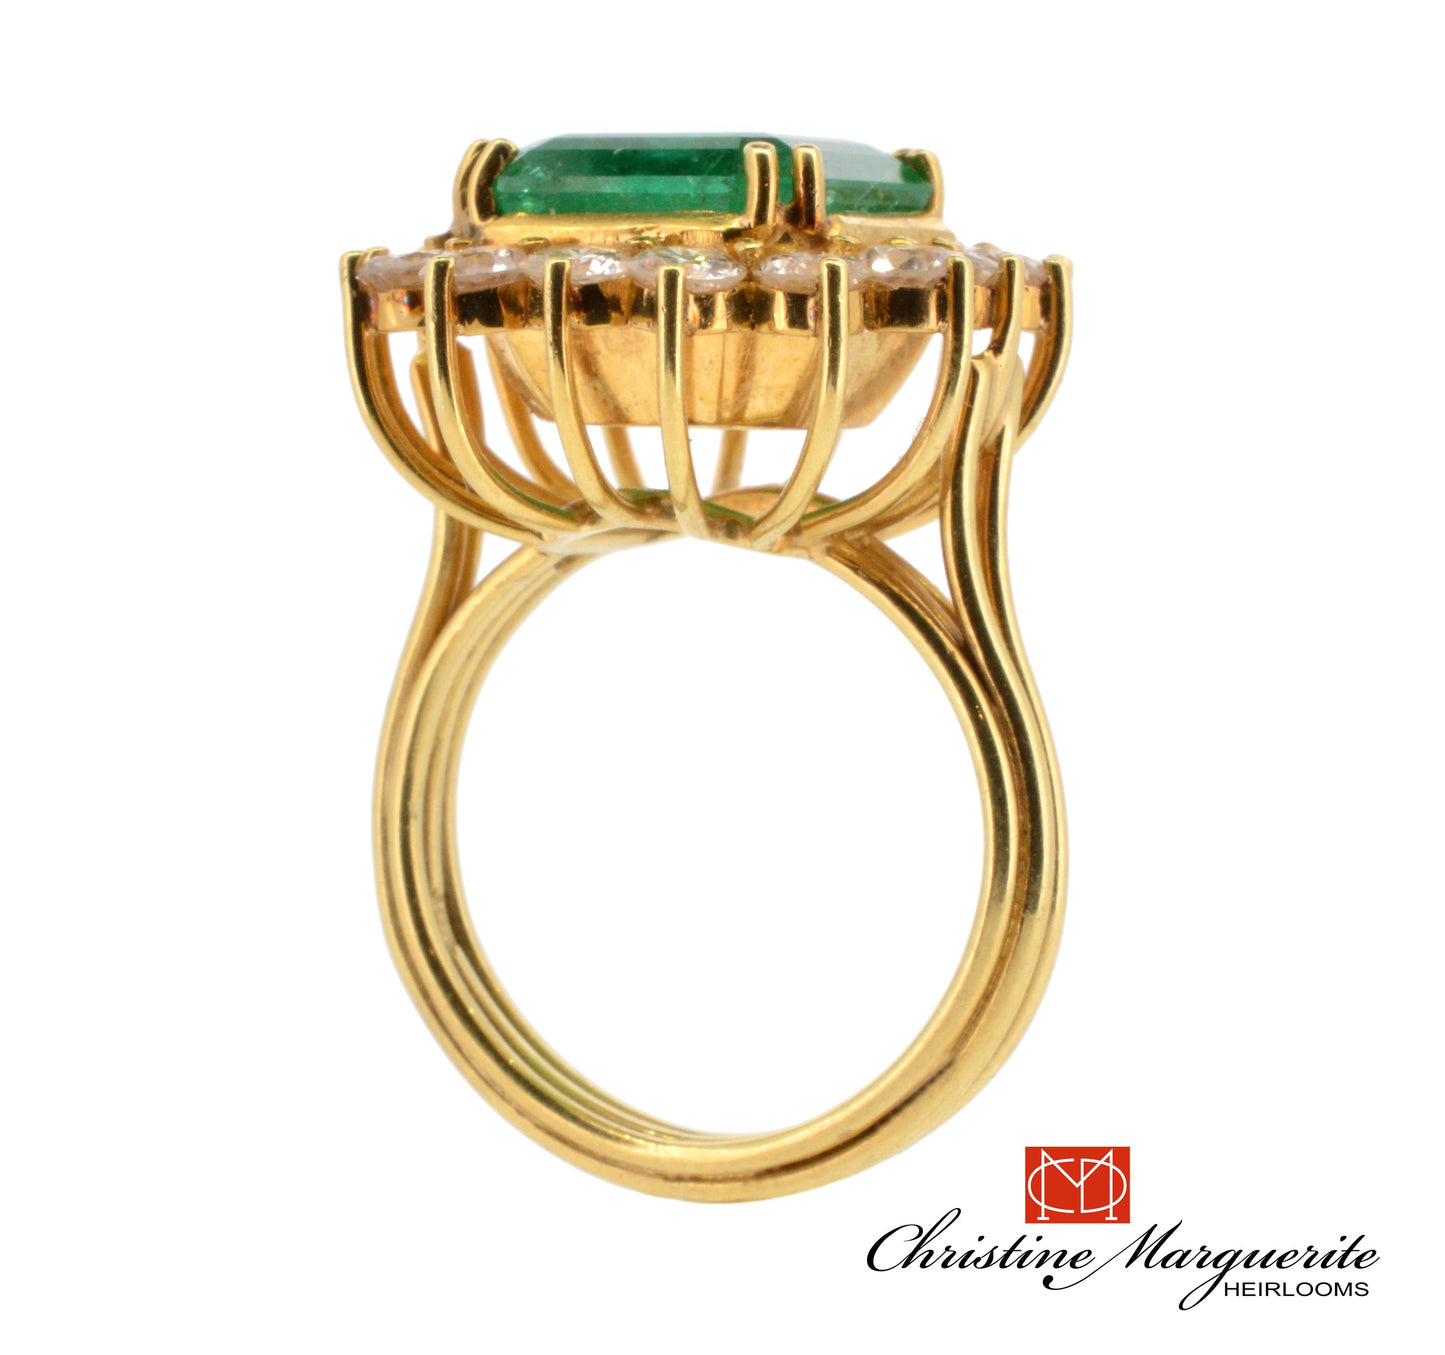 HE Colombian emerald ring with diamond accents in 18KY gold 5,5carats